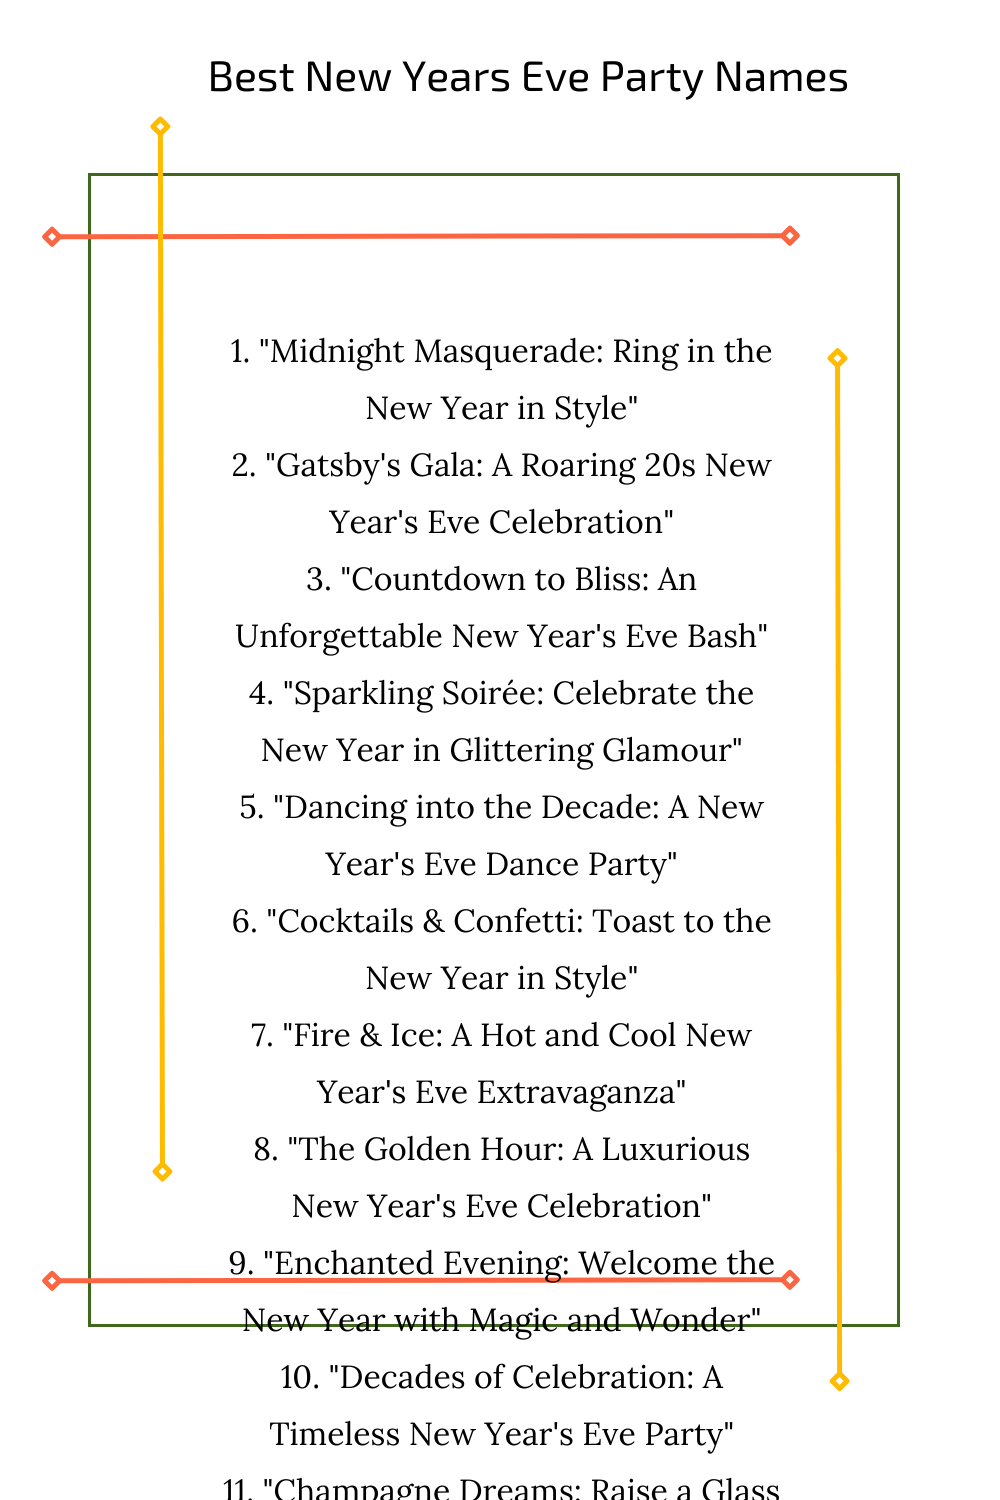 Best New Years Eve Party Names